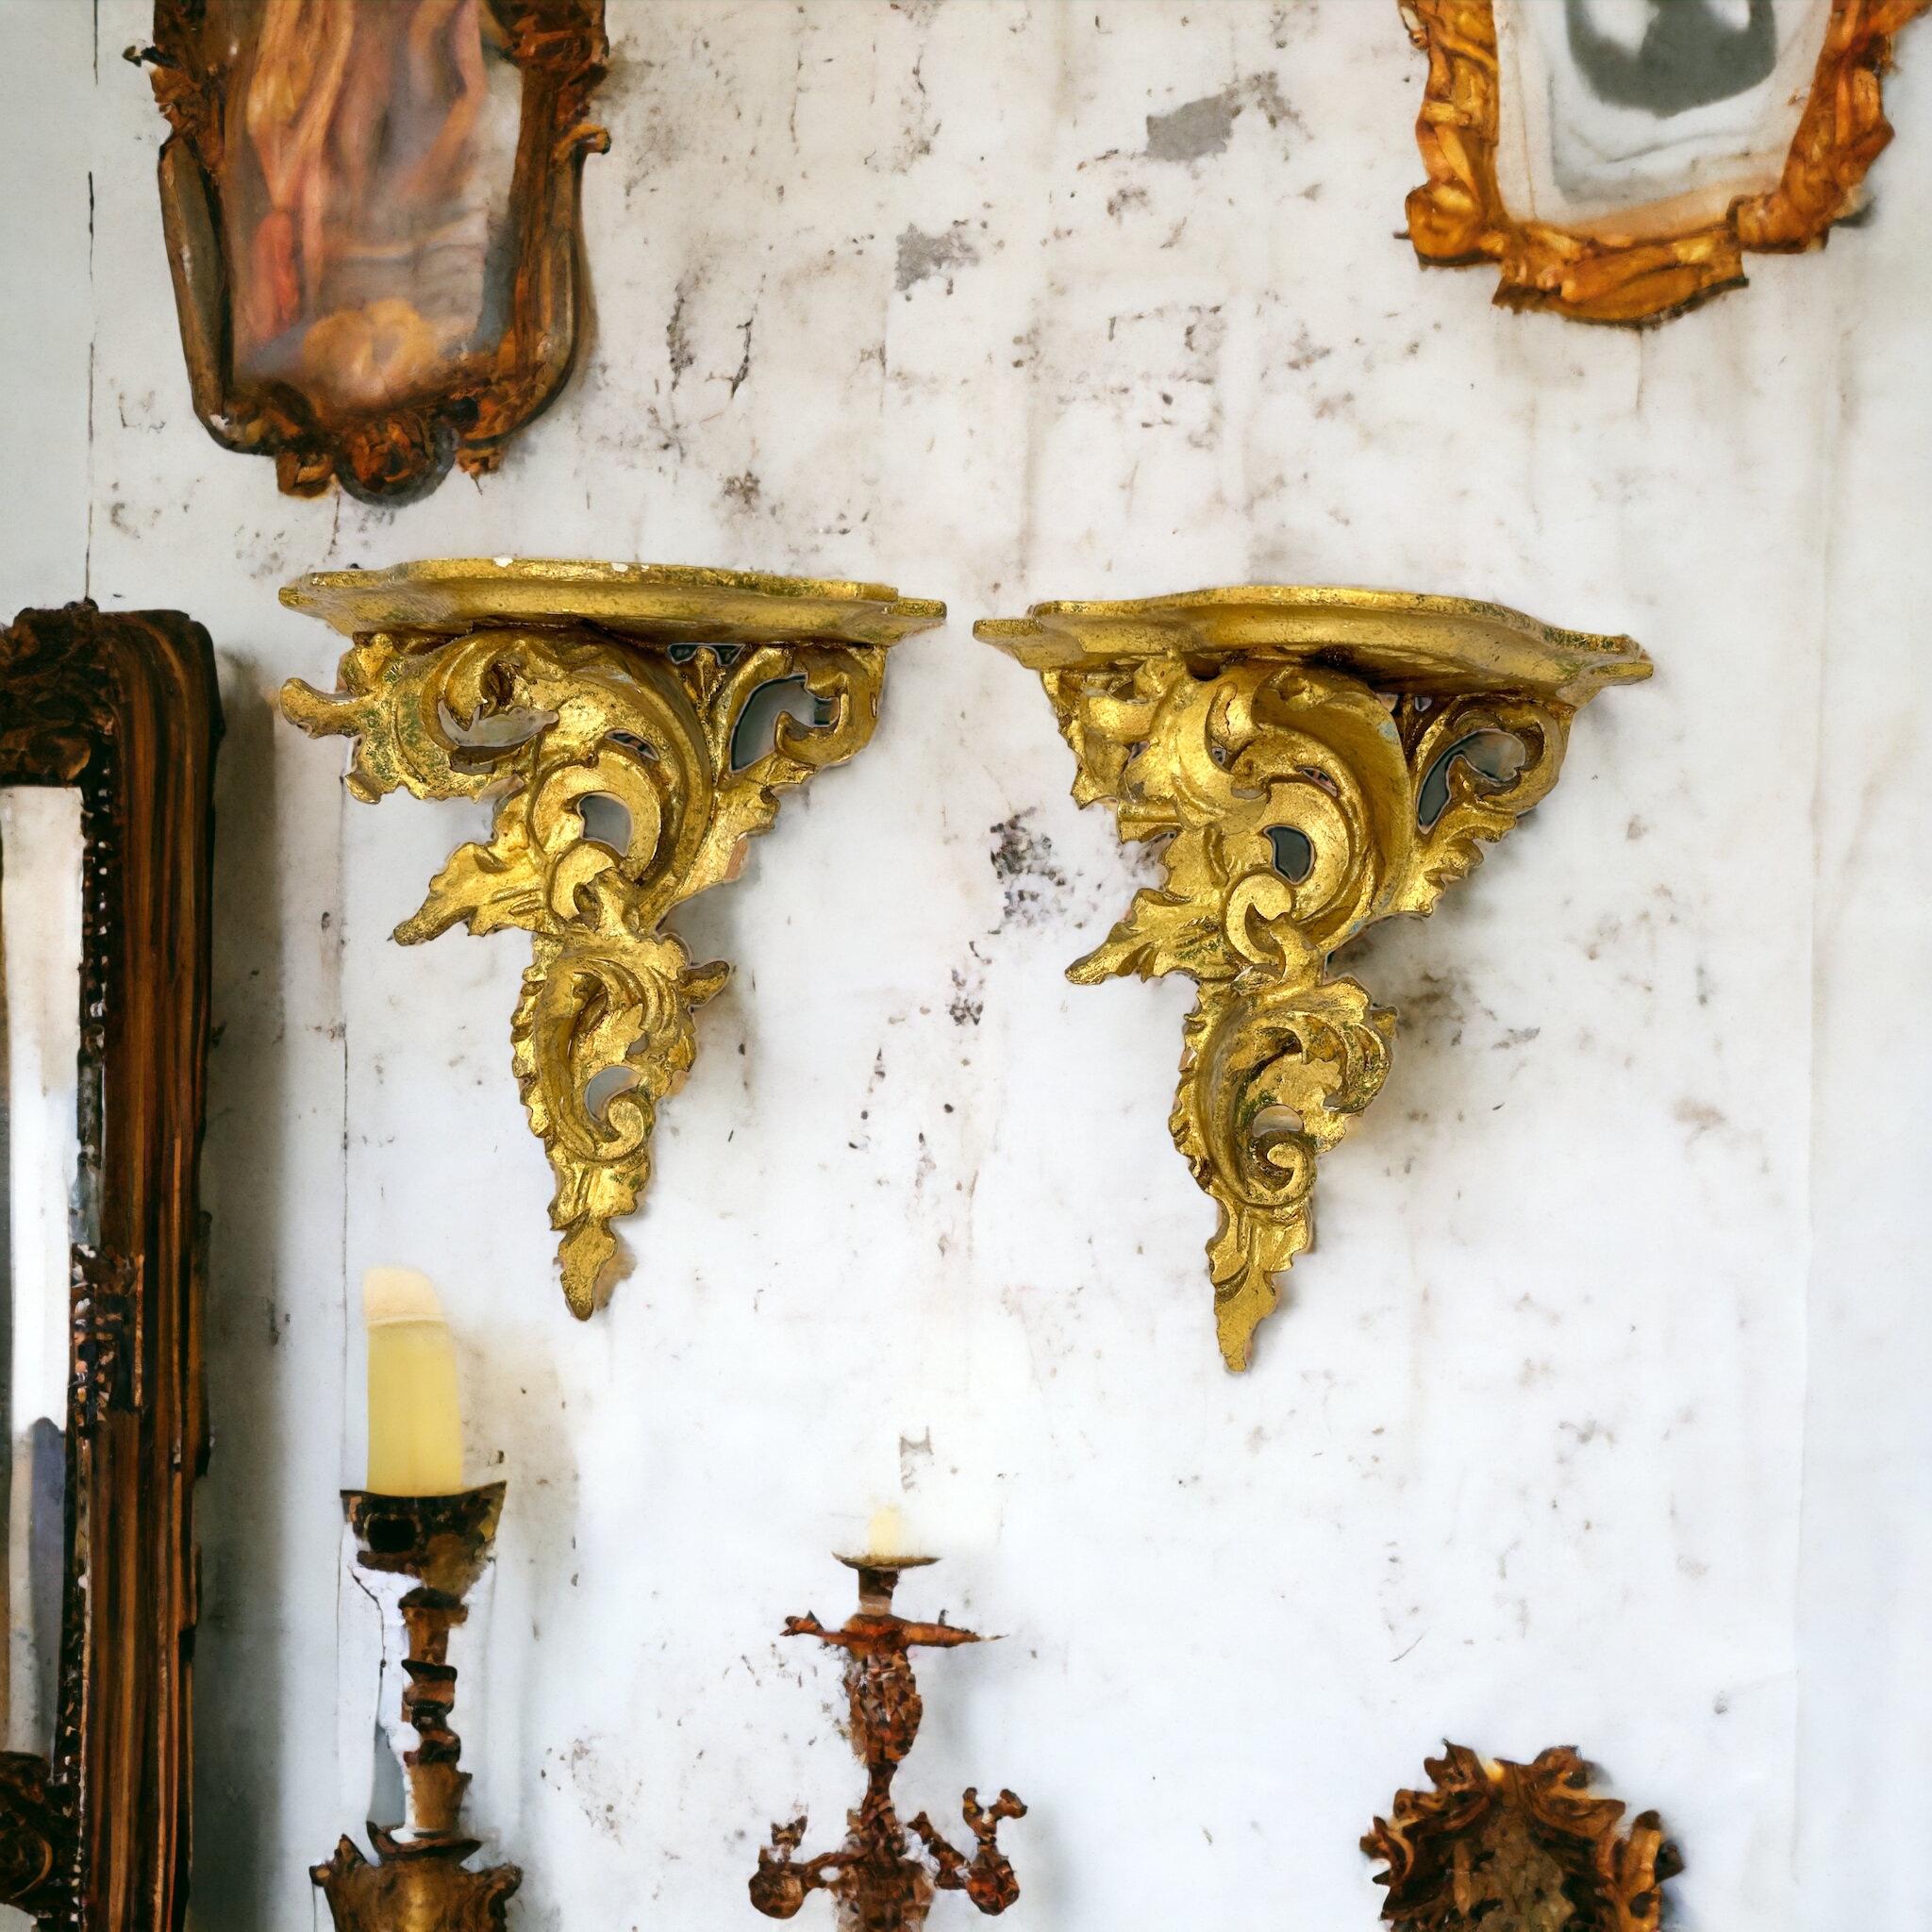 Offered is an absolutely stunning pair of, 1950s Italian gilt wood wall shelves or wall consoles. Minor patina gives this piece a classy statement. Made of hand carved wood and gold plated. A nice shelf to present a statuette or a beautiful object.